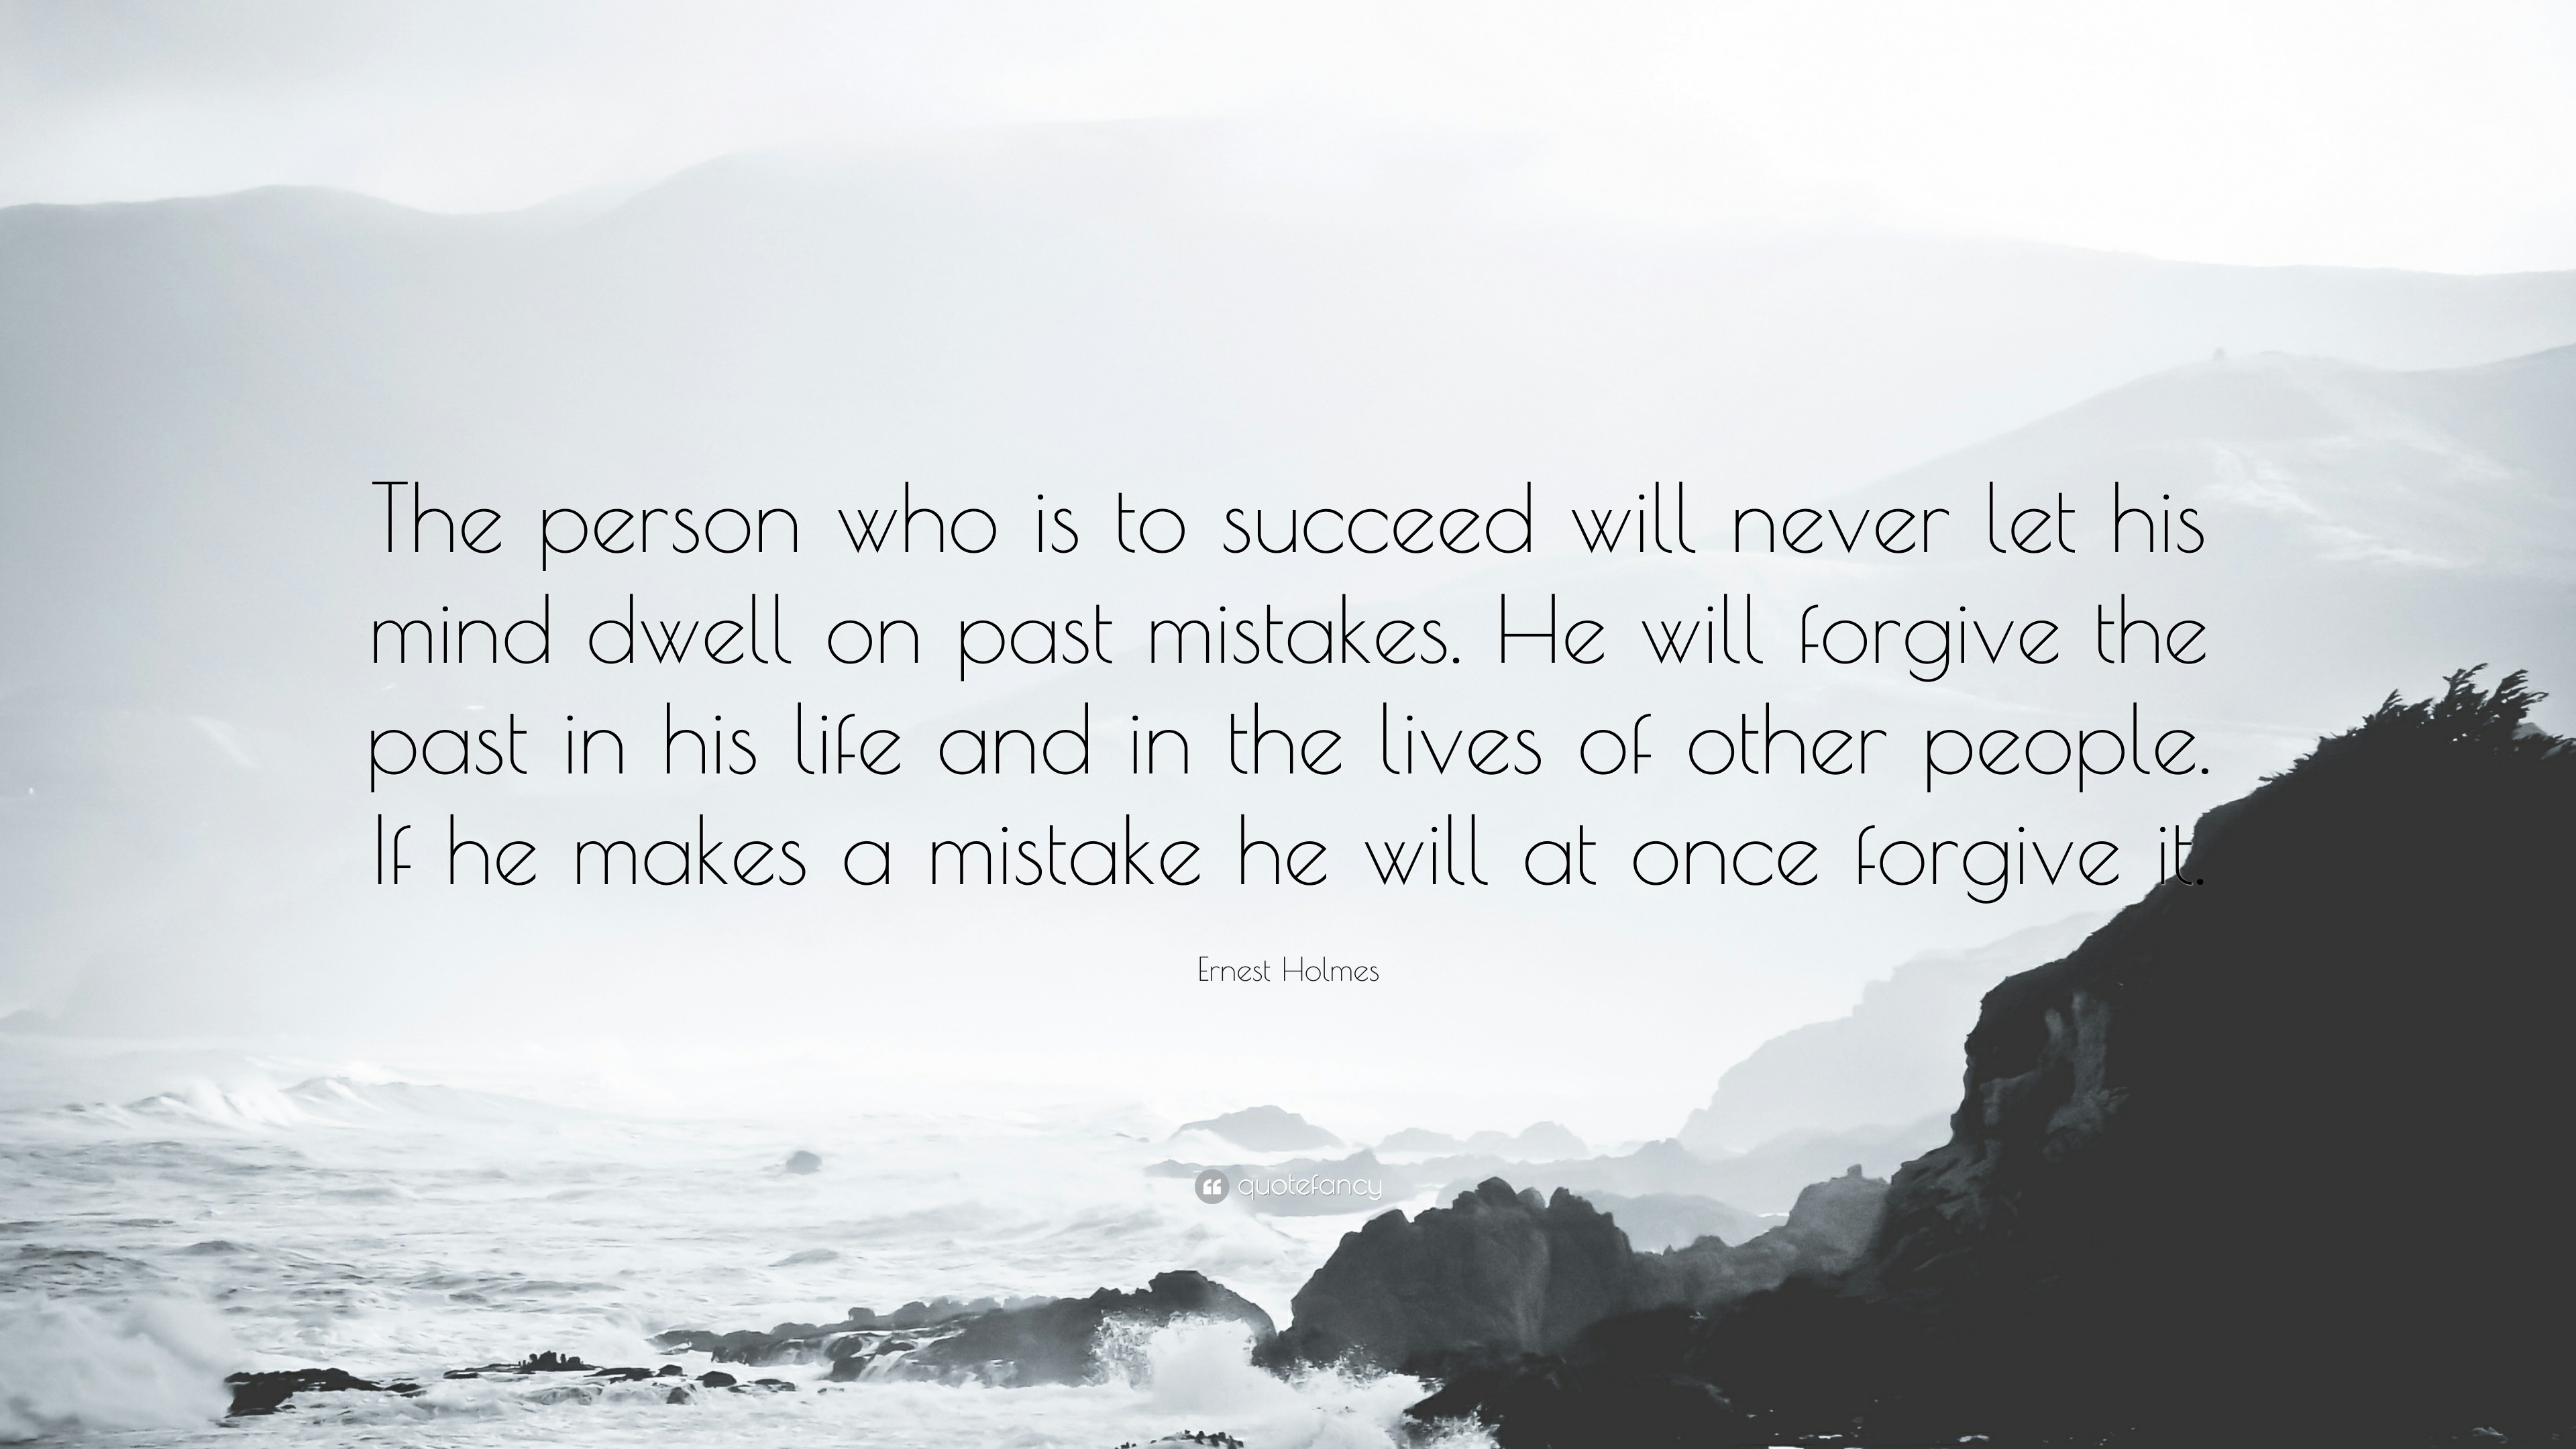 Ernest Holmes Quote: “The person who is to succeed will never let his ...